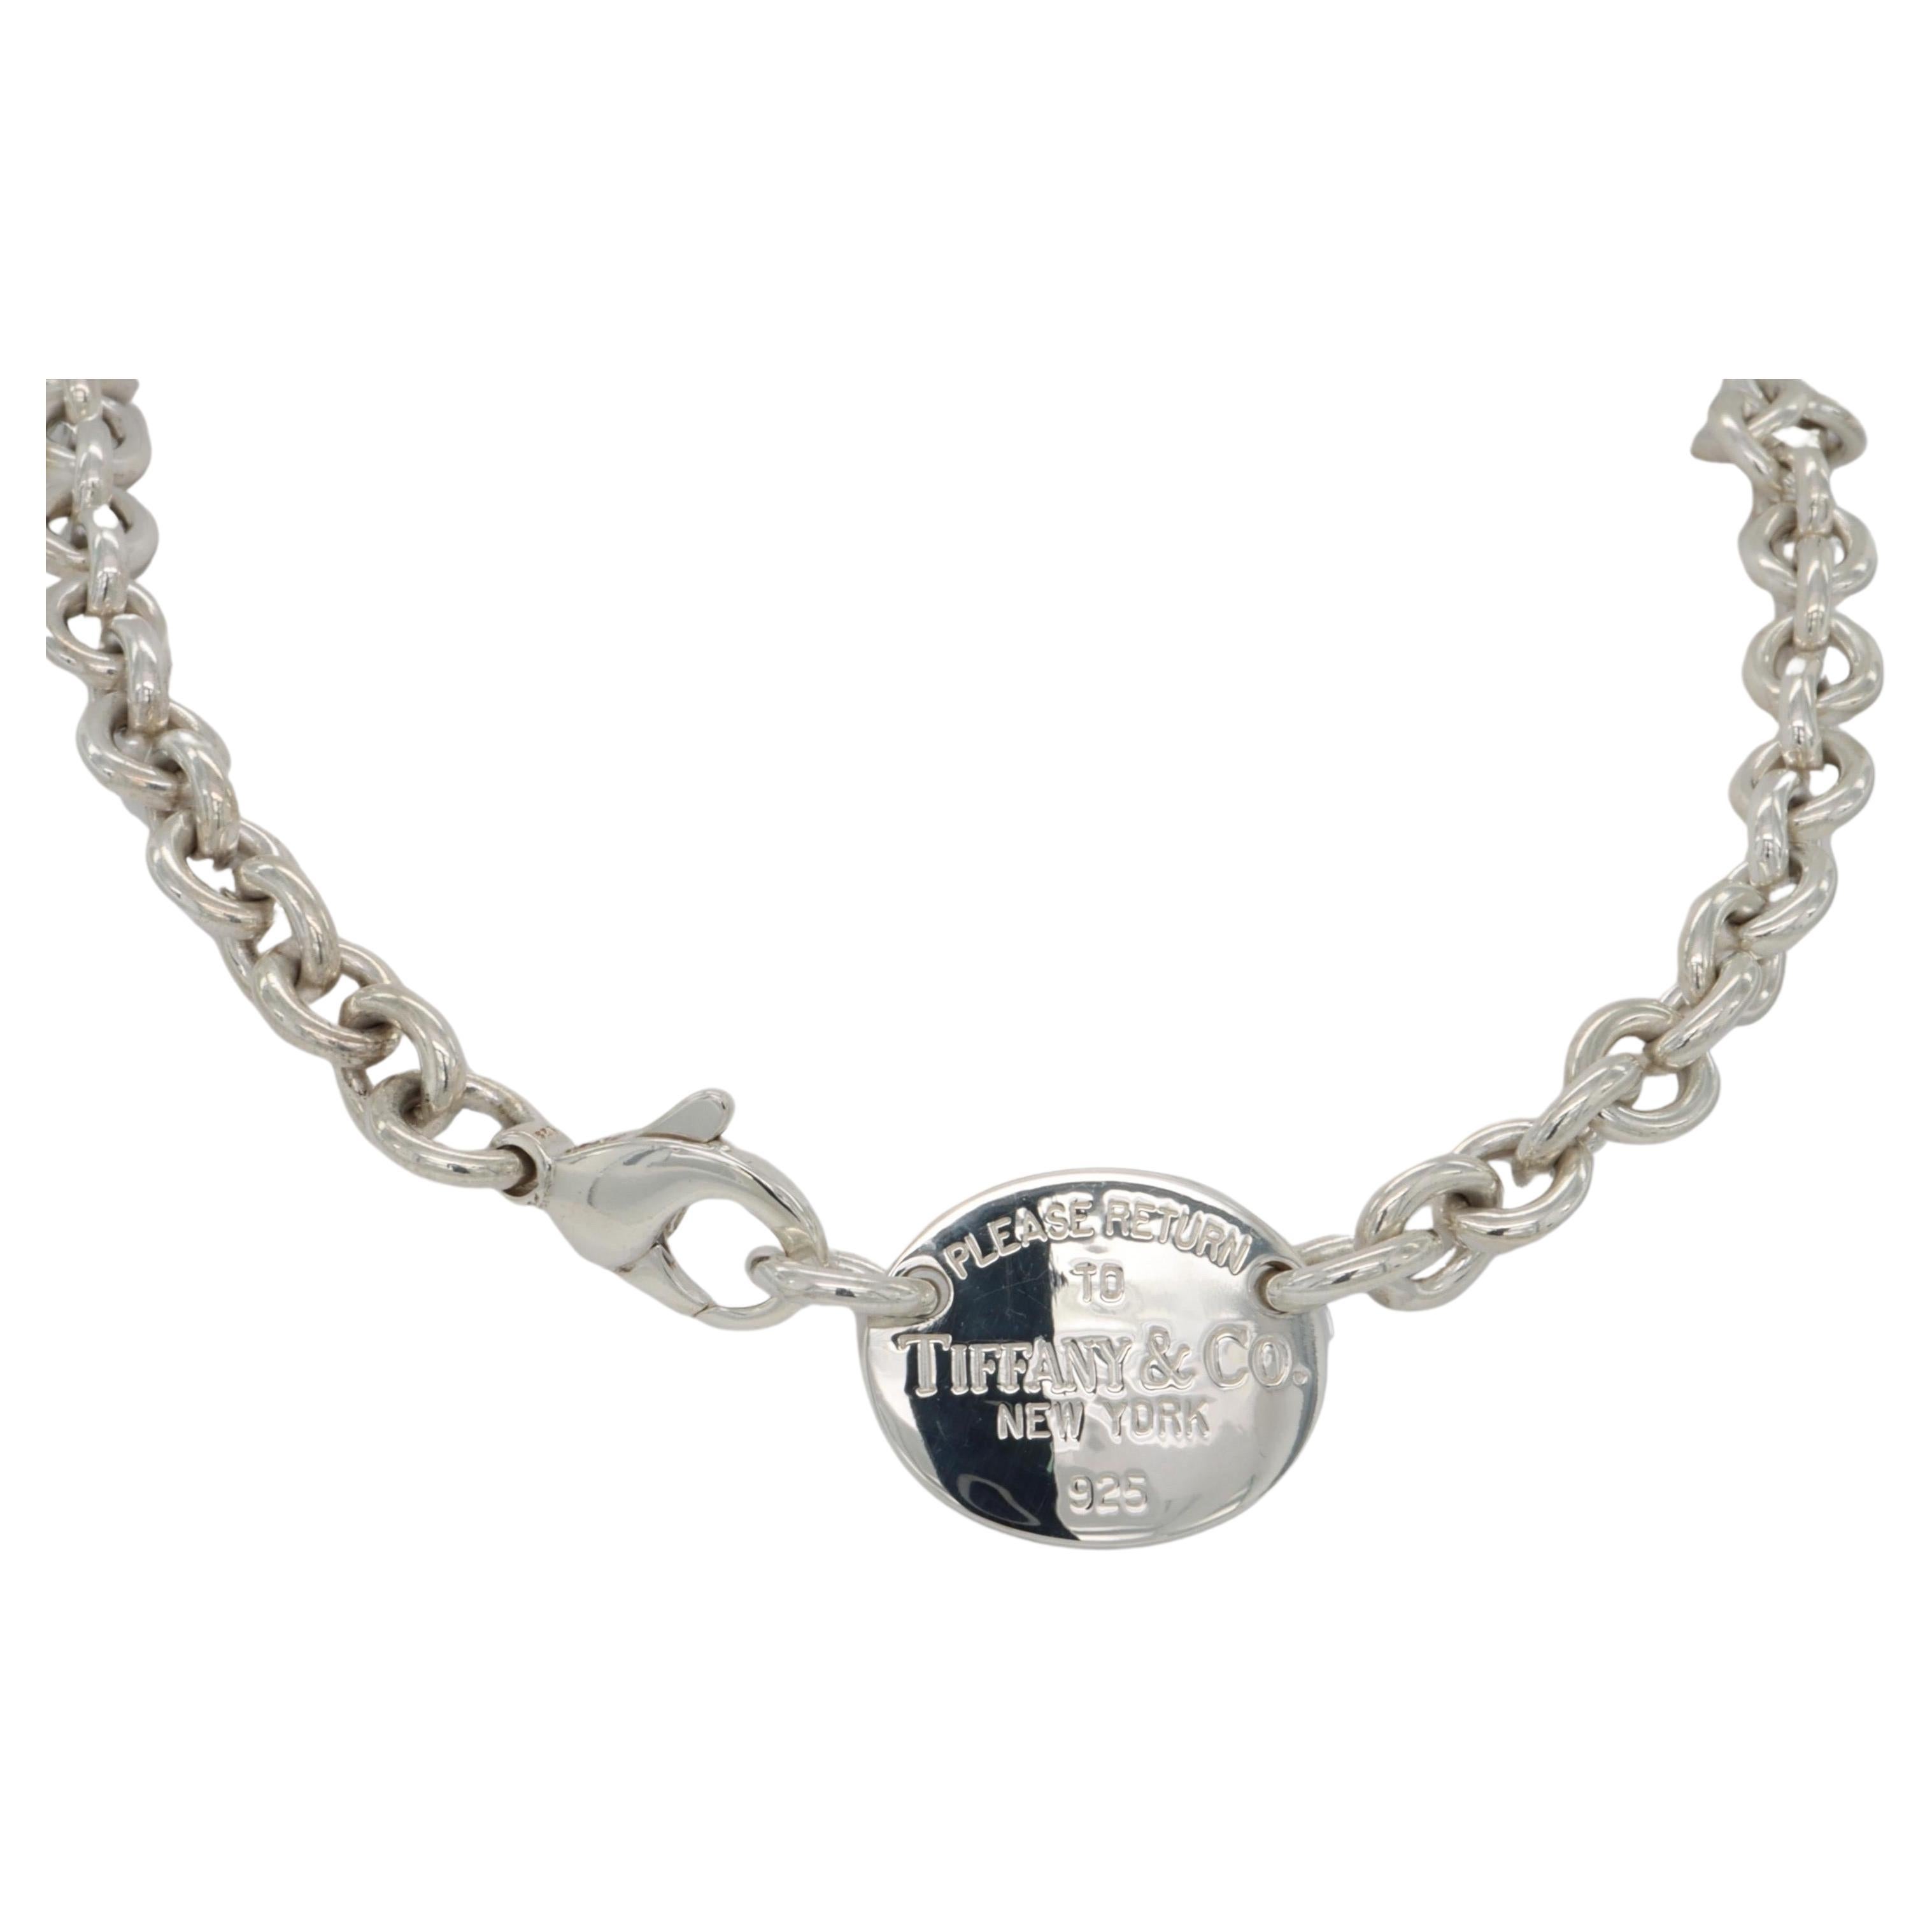 Tiffany & Co. Silver Return To Tiffany Oval Tag Charm Link Necklace